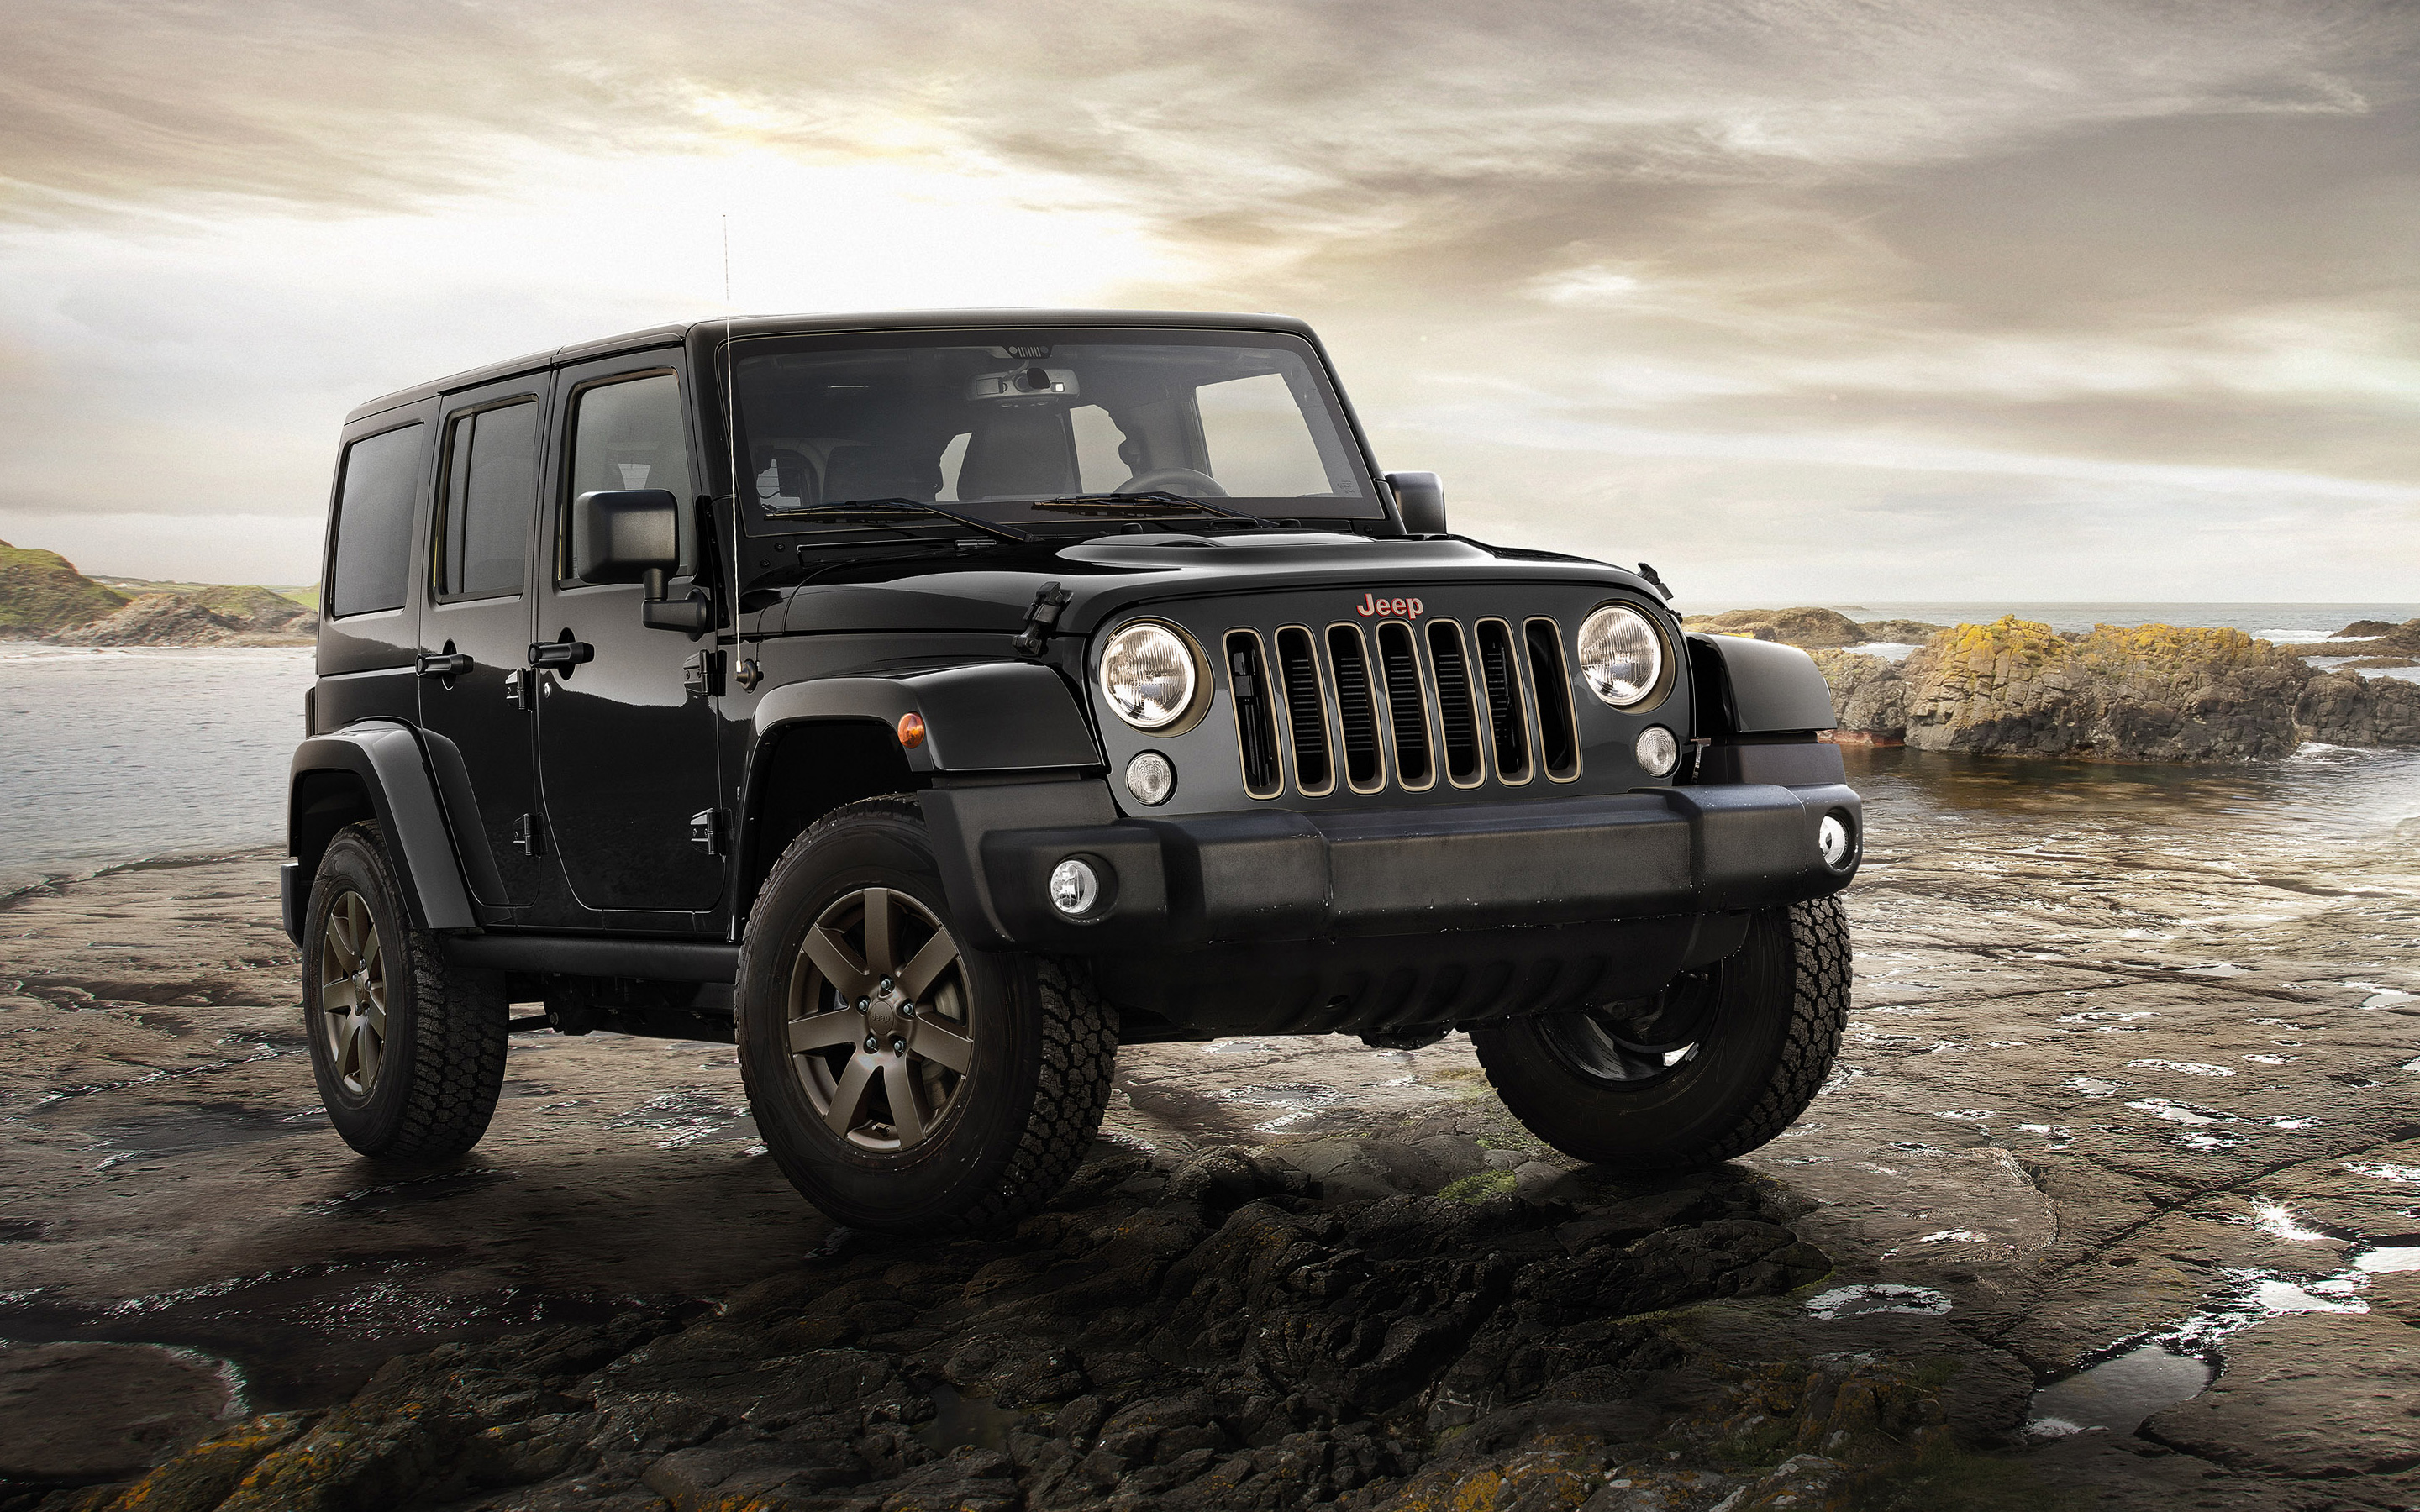 Wallpaper Black Jeep Wrangler on Brown Field Under White Clouds During  Daytime, Background - Download Free Image